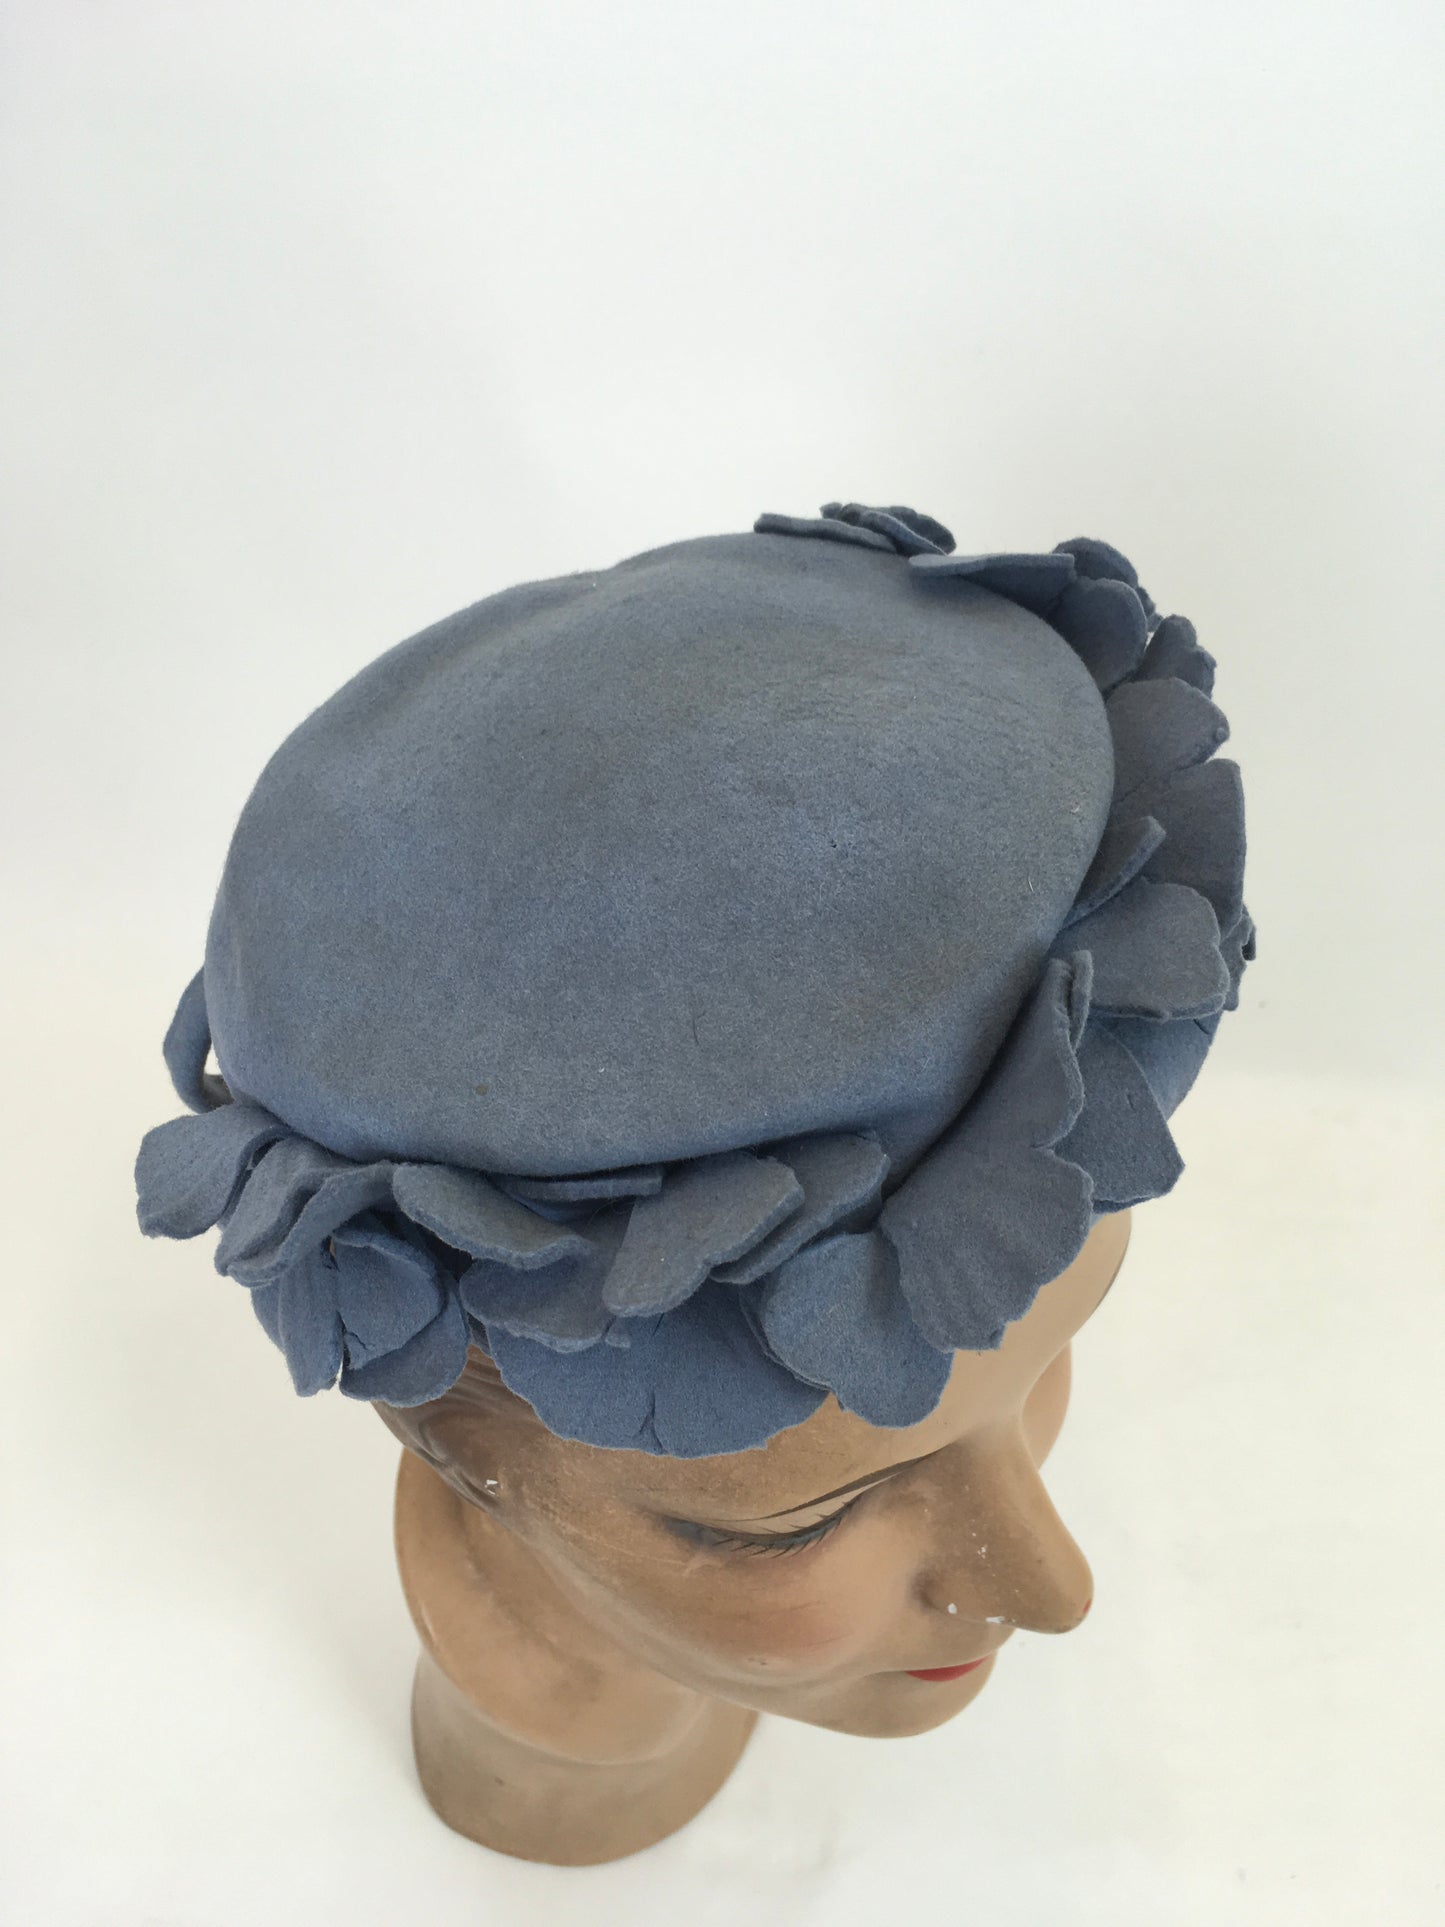 Original 1940’s New York Creations Felt Topper Hat - With Floral Adornment in Cornflower Blue